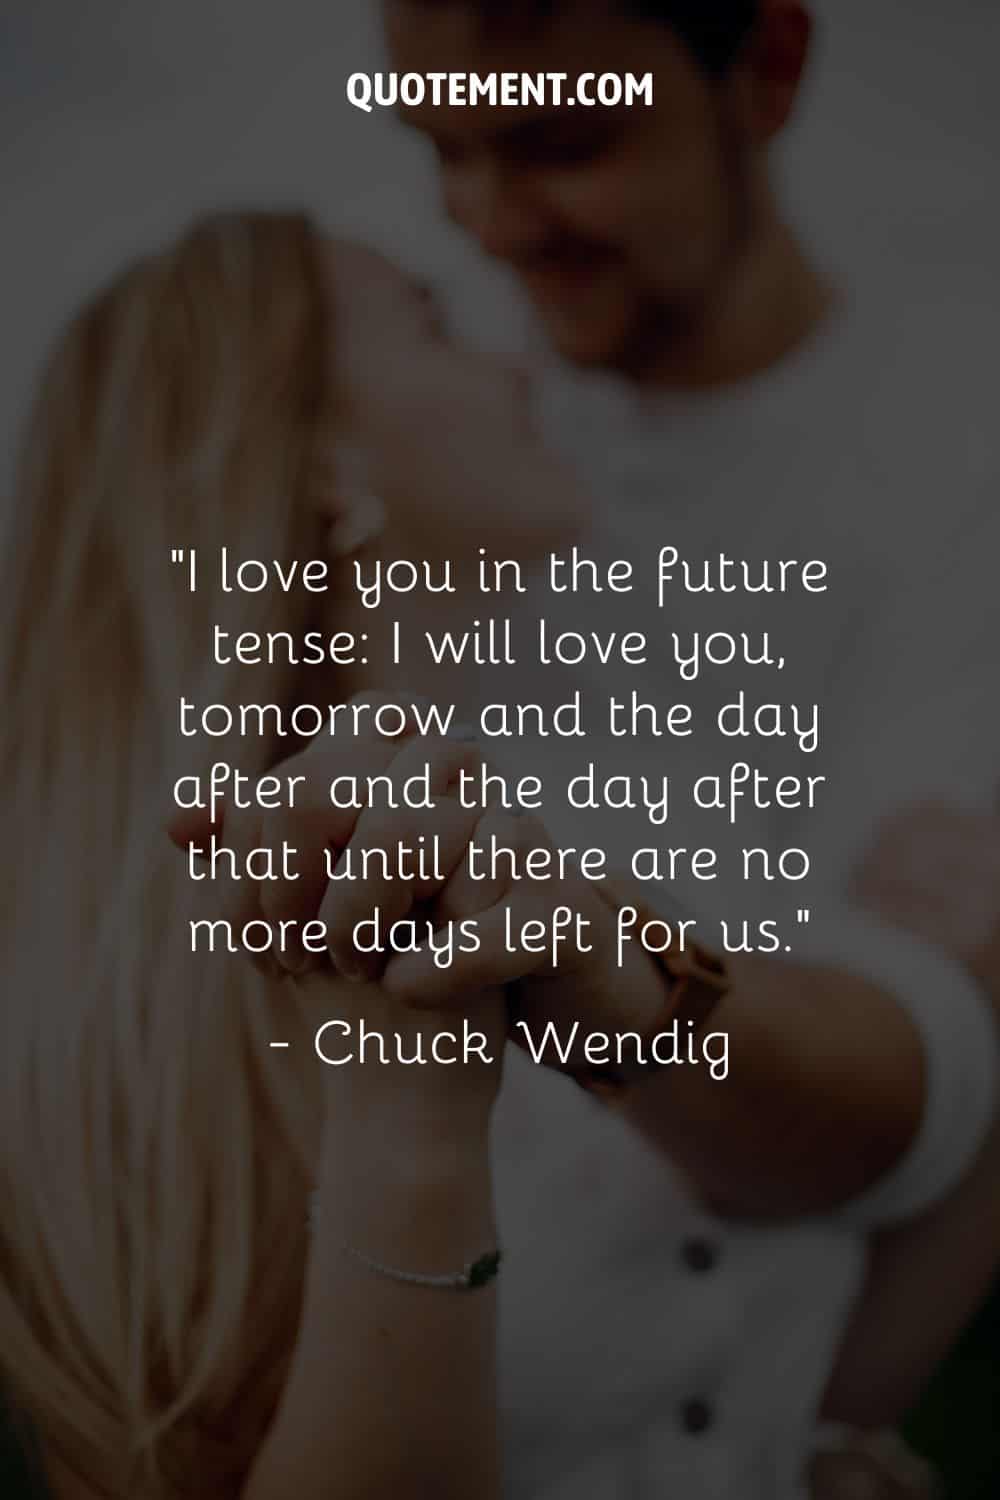 “I love you in the future tense I will love you, tomorrow and the day after and the day after that until there are no more days left for us.” ― Chuck Wendig